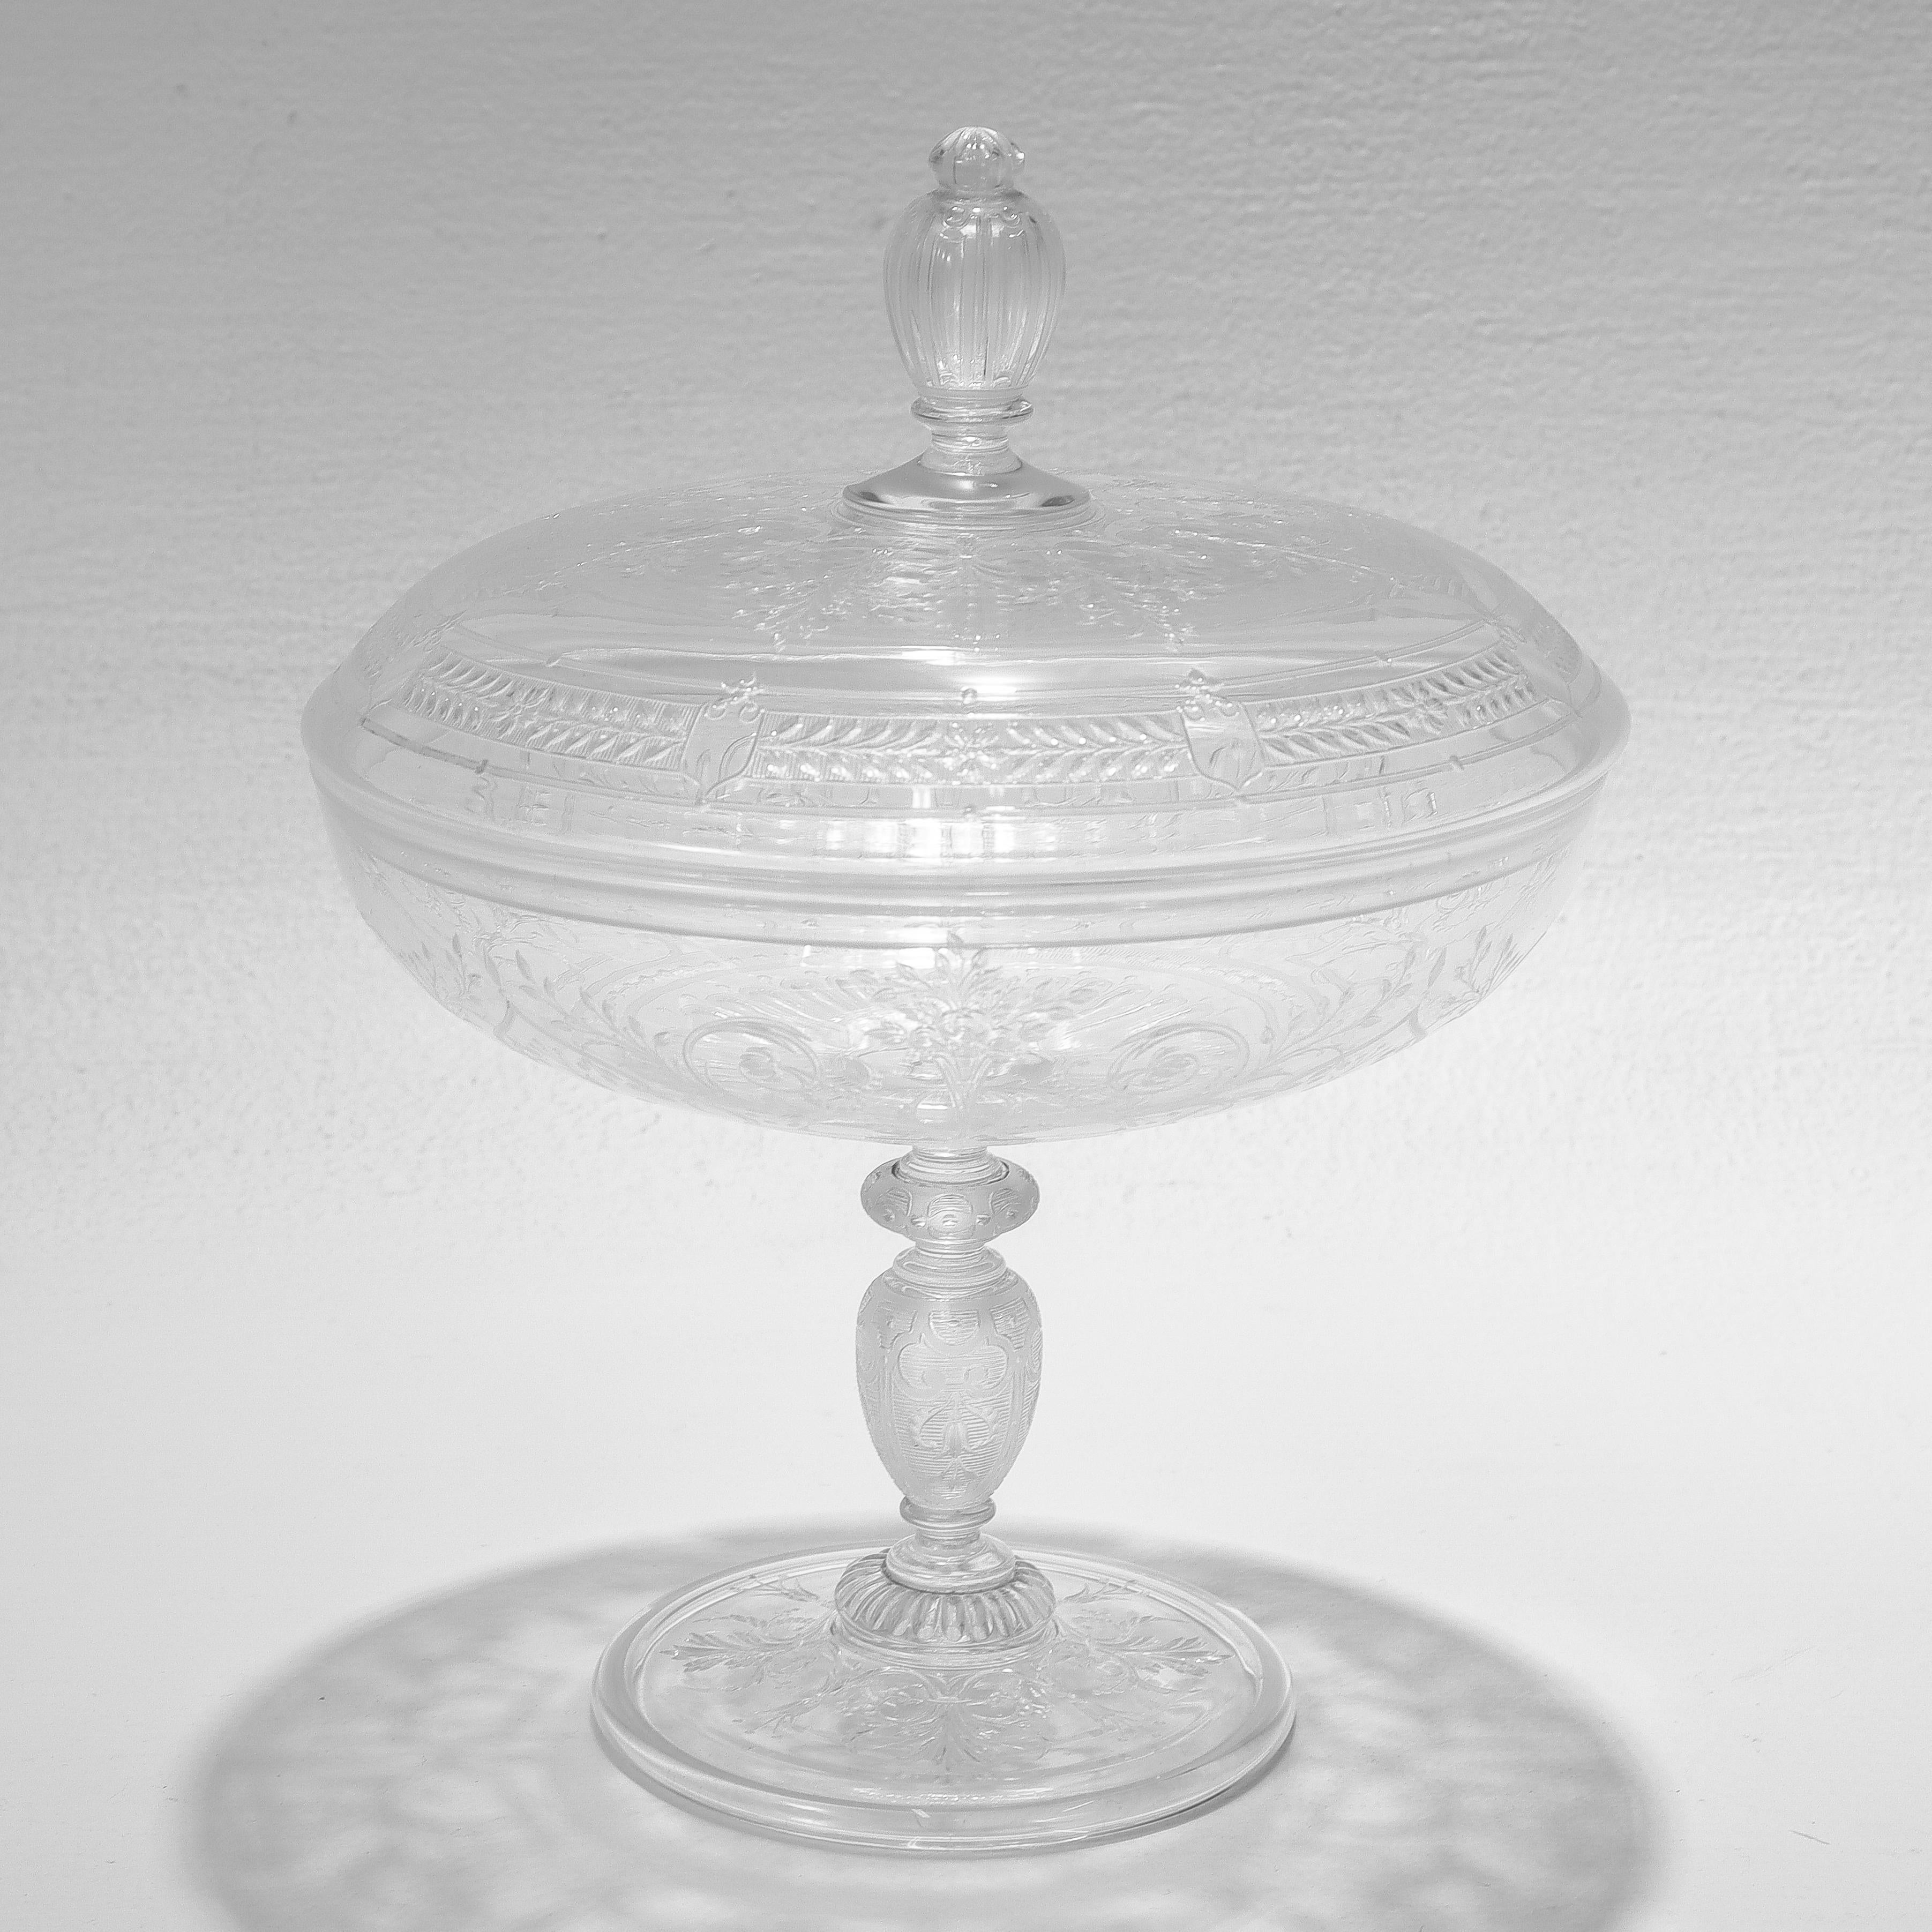 English Antique Stourbridge Etched & Engraved Glass Lidded Compote or Tazza For Sale